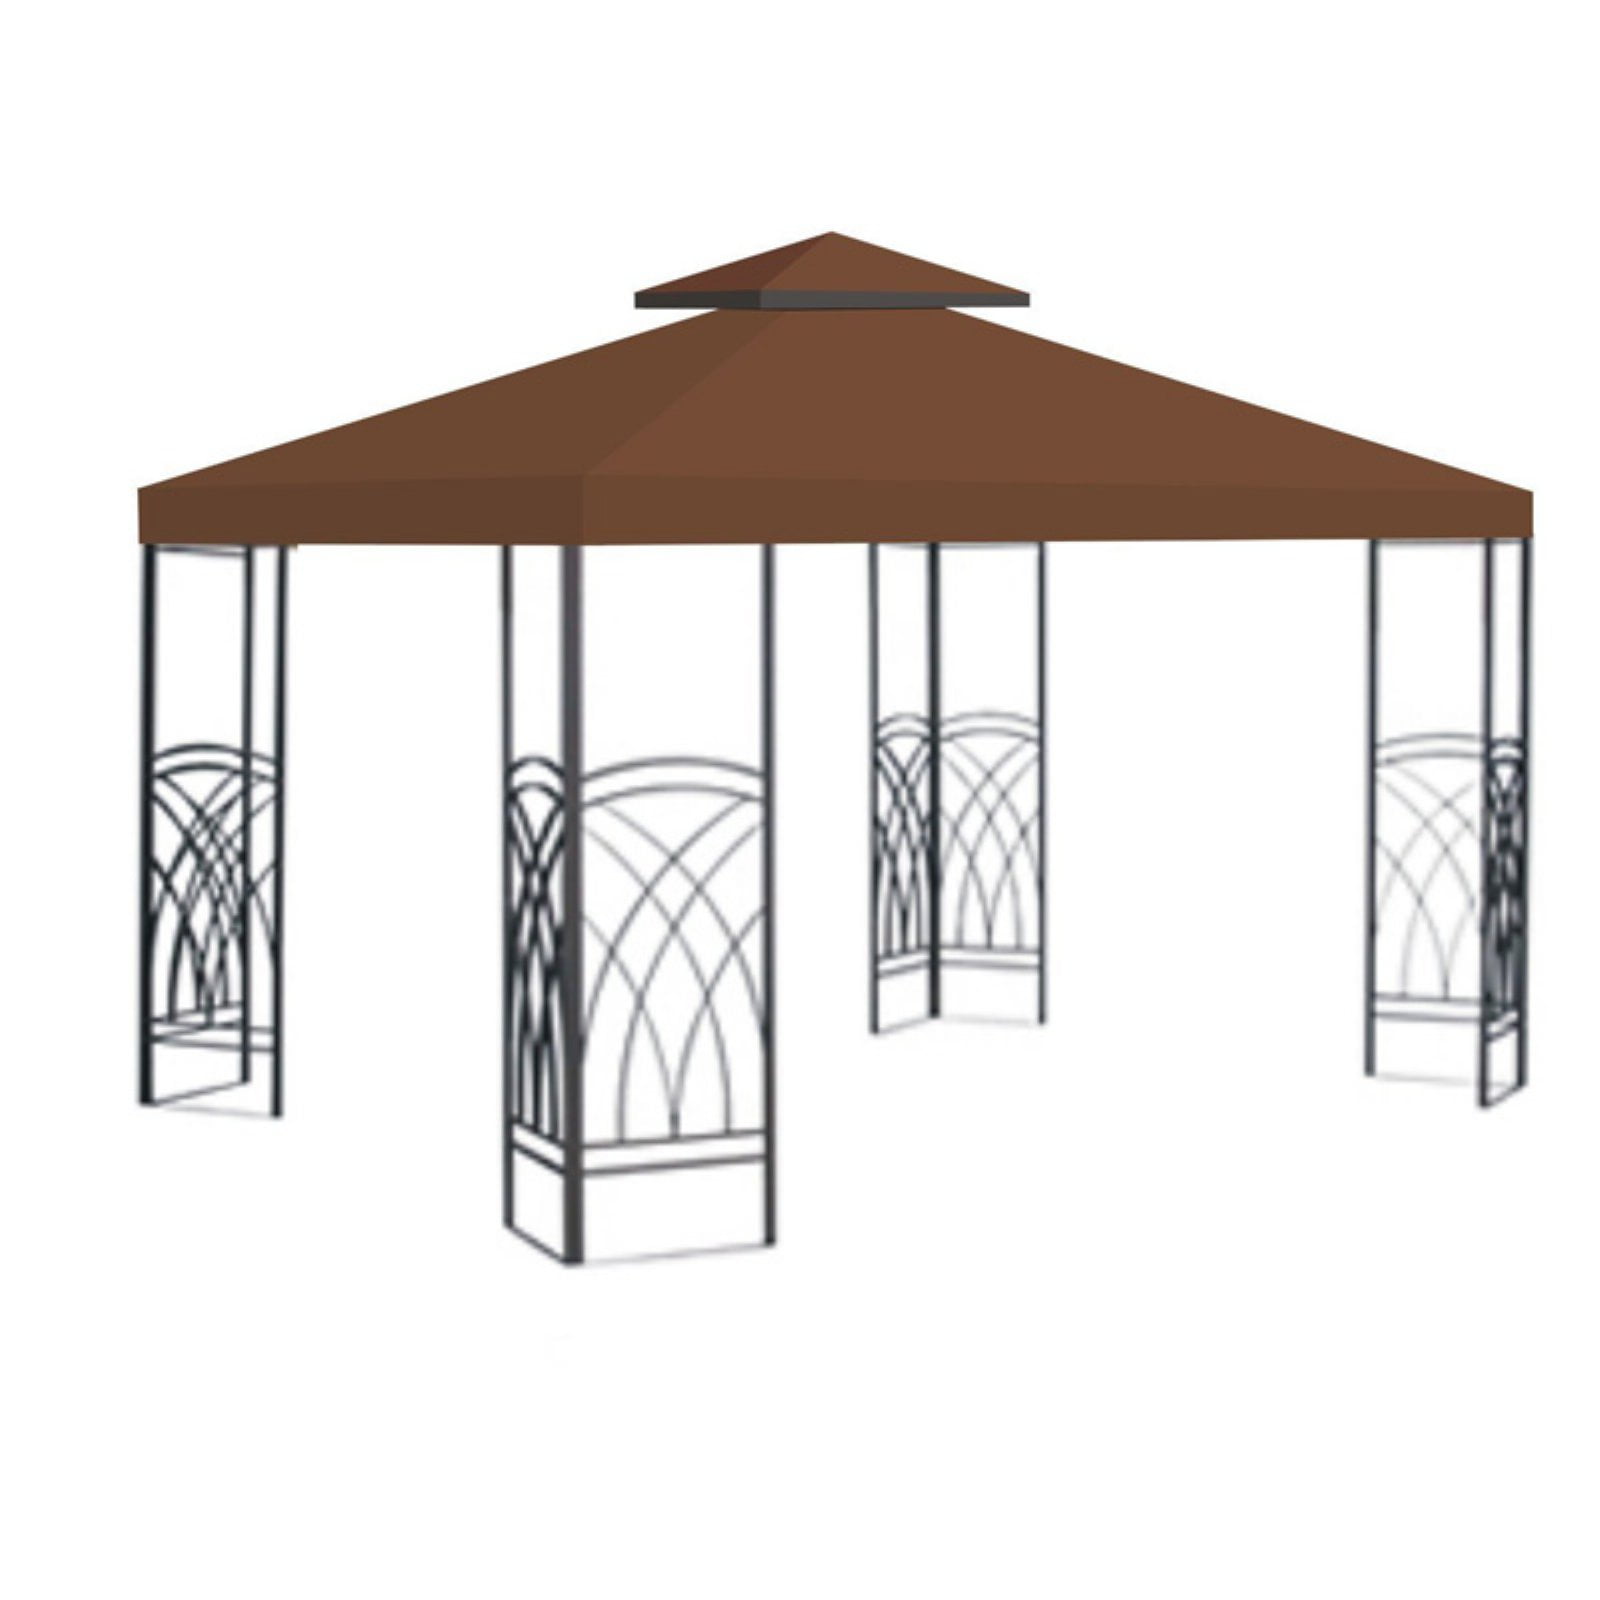 Sunrise 10 X 10 Ft Gazebo Replacement Double Tier Canopy Cover